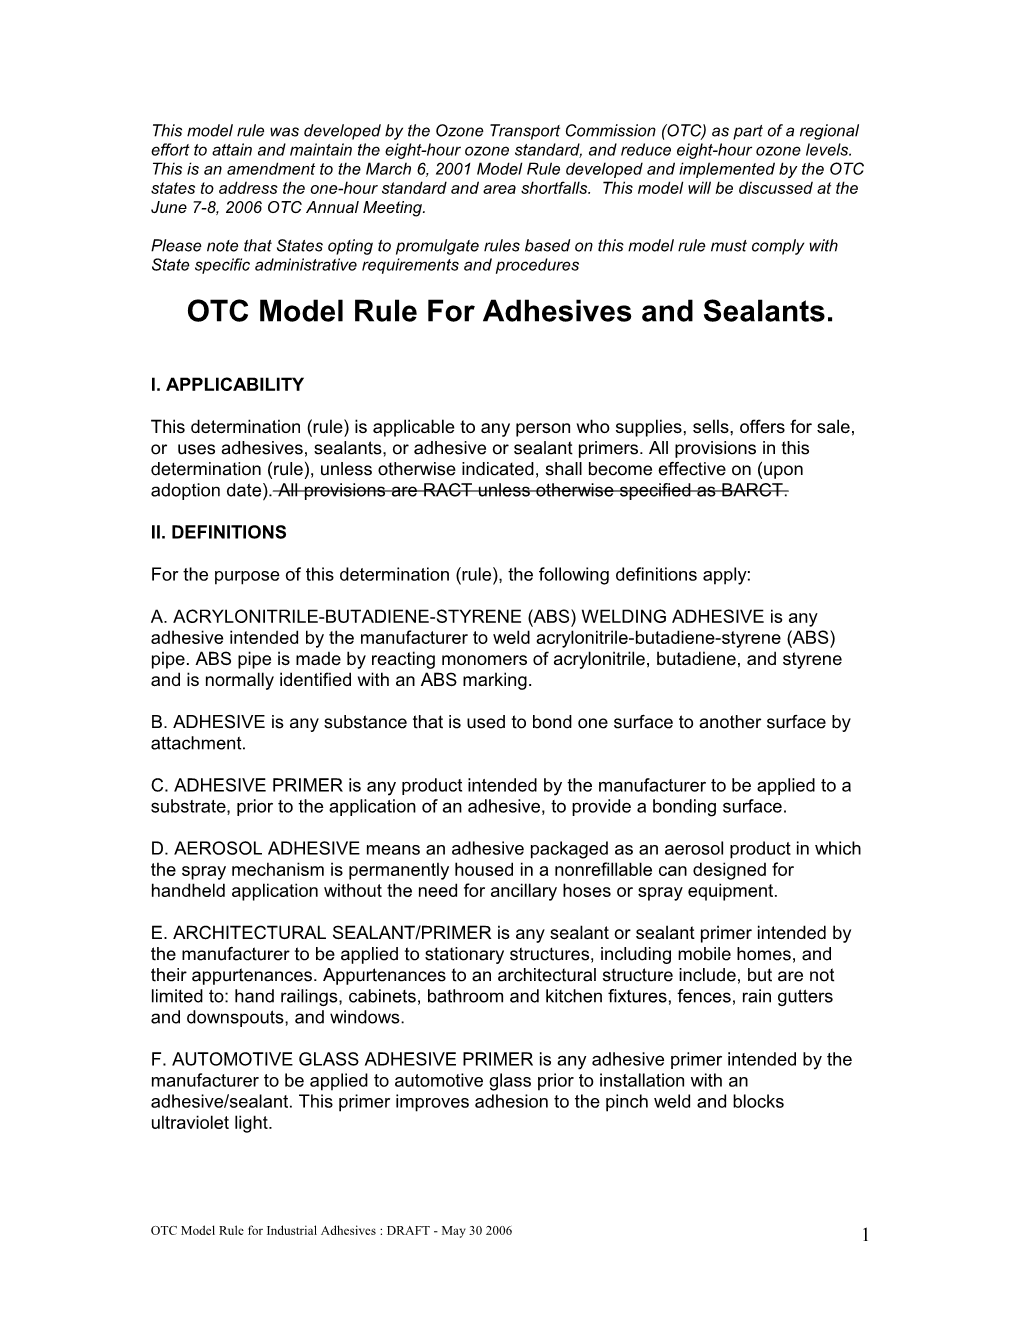 OTC Model Rule For Industrial Adhesives